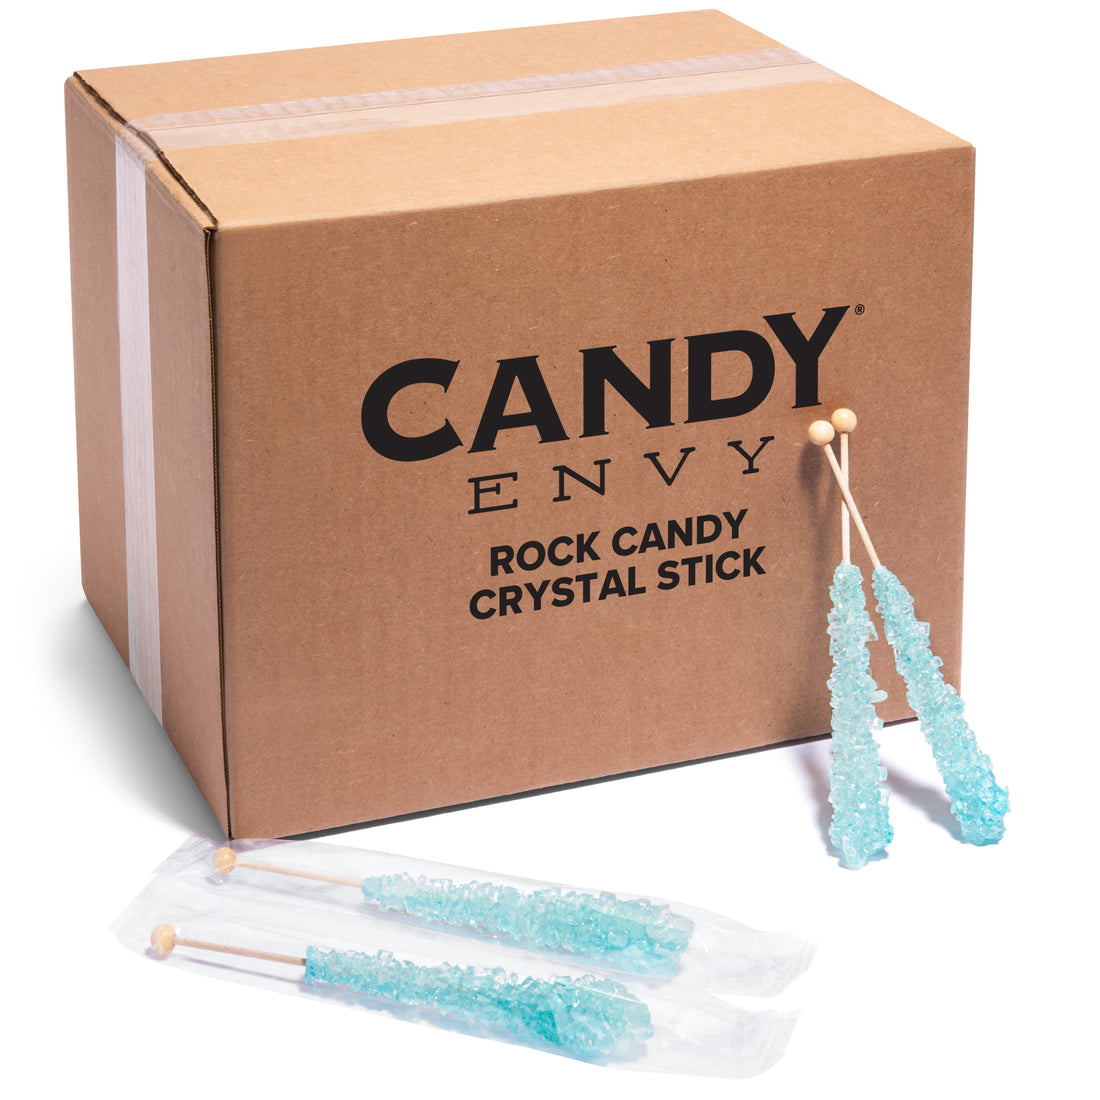 Light Blue Rock Crystal Candy on a Stick Flavored